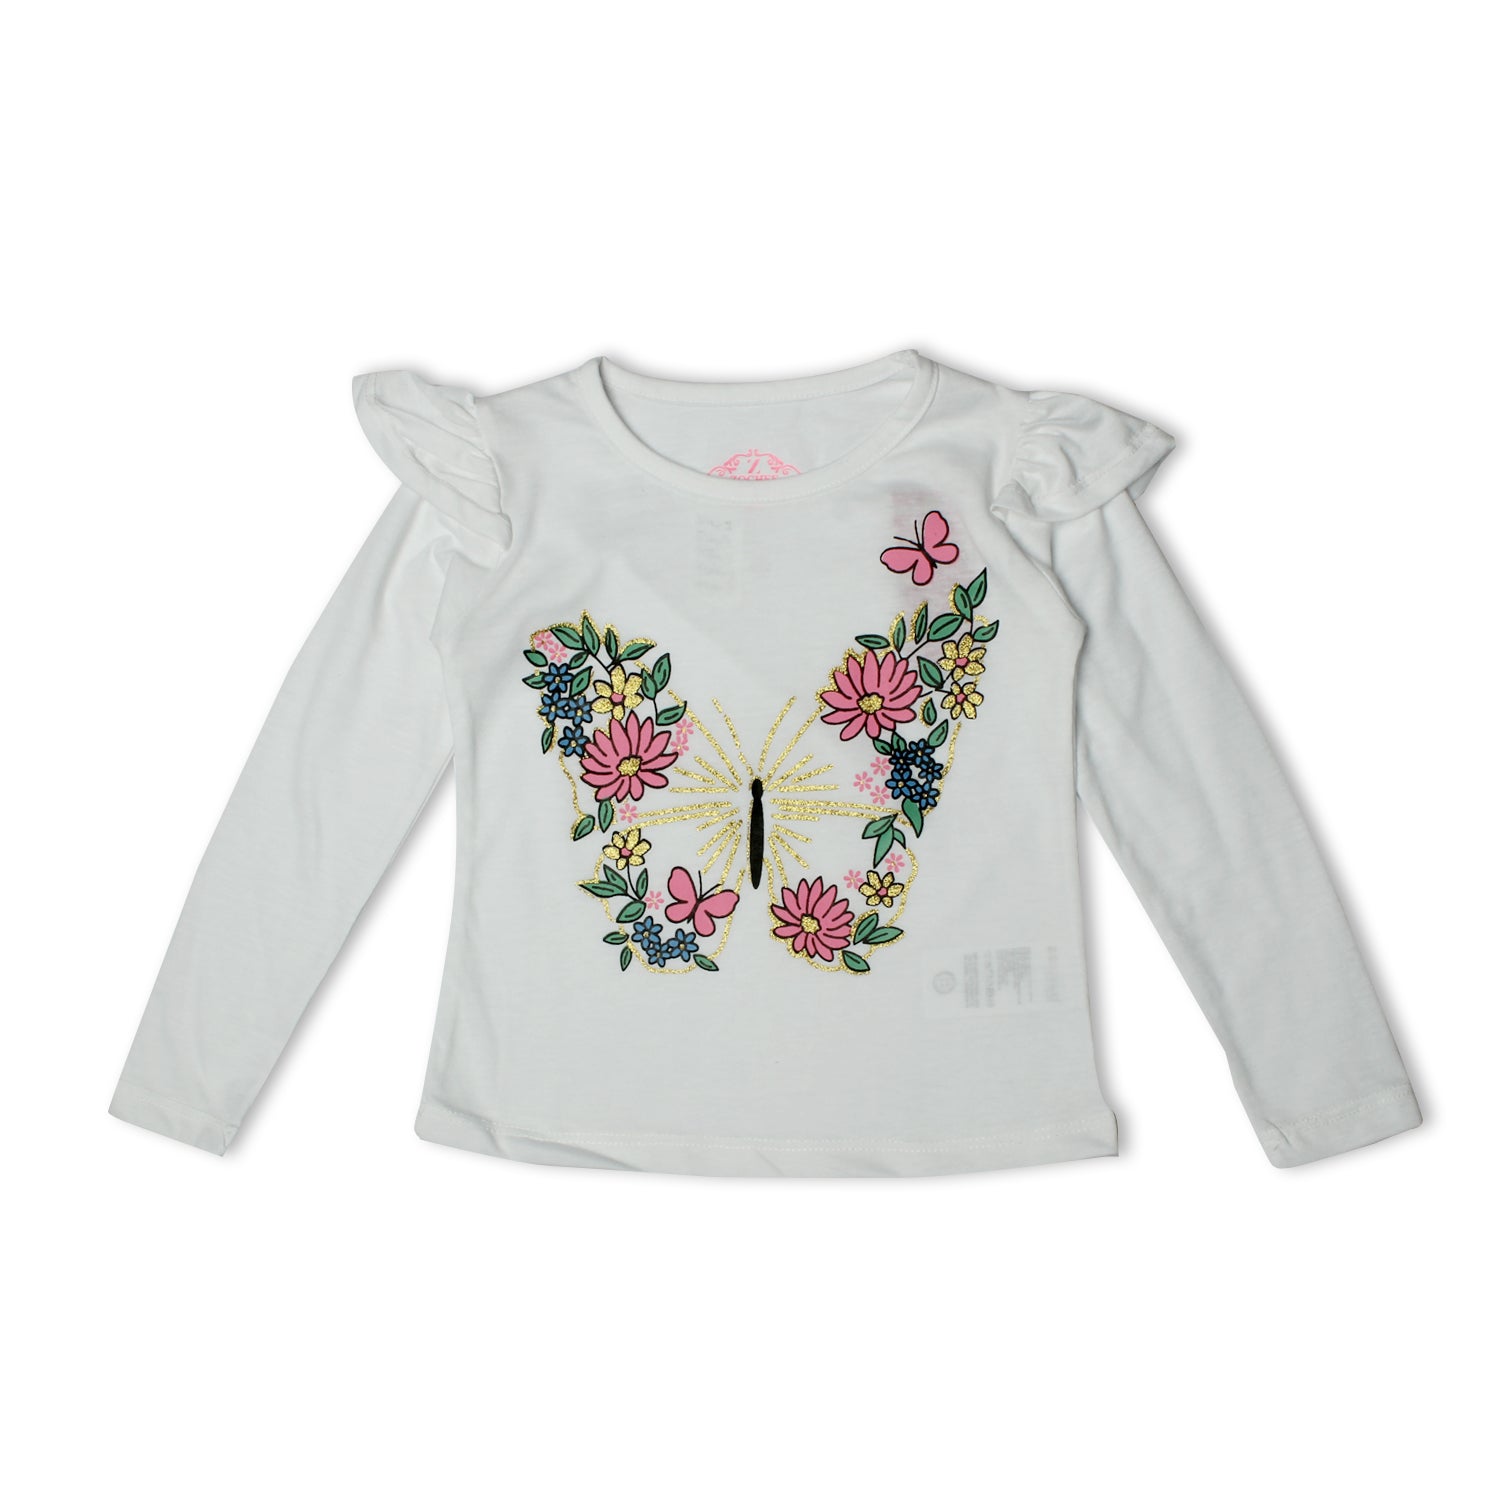 WHITE FULL SLEEVES BUTTERFLY PRINTED TOP FOR GIRLS